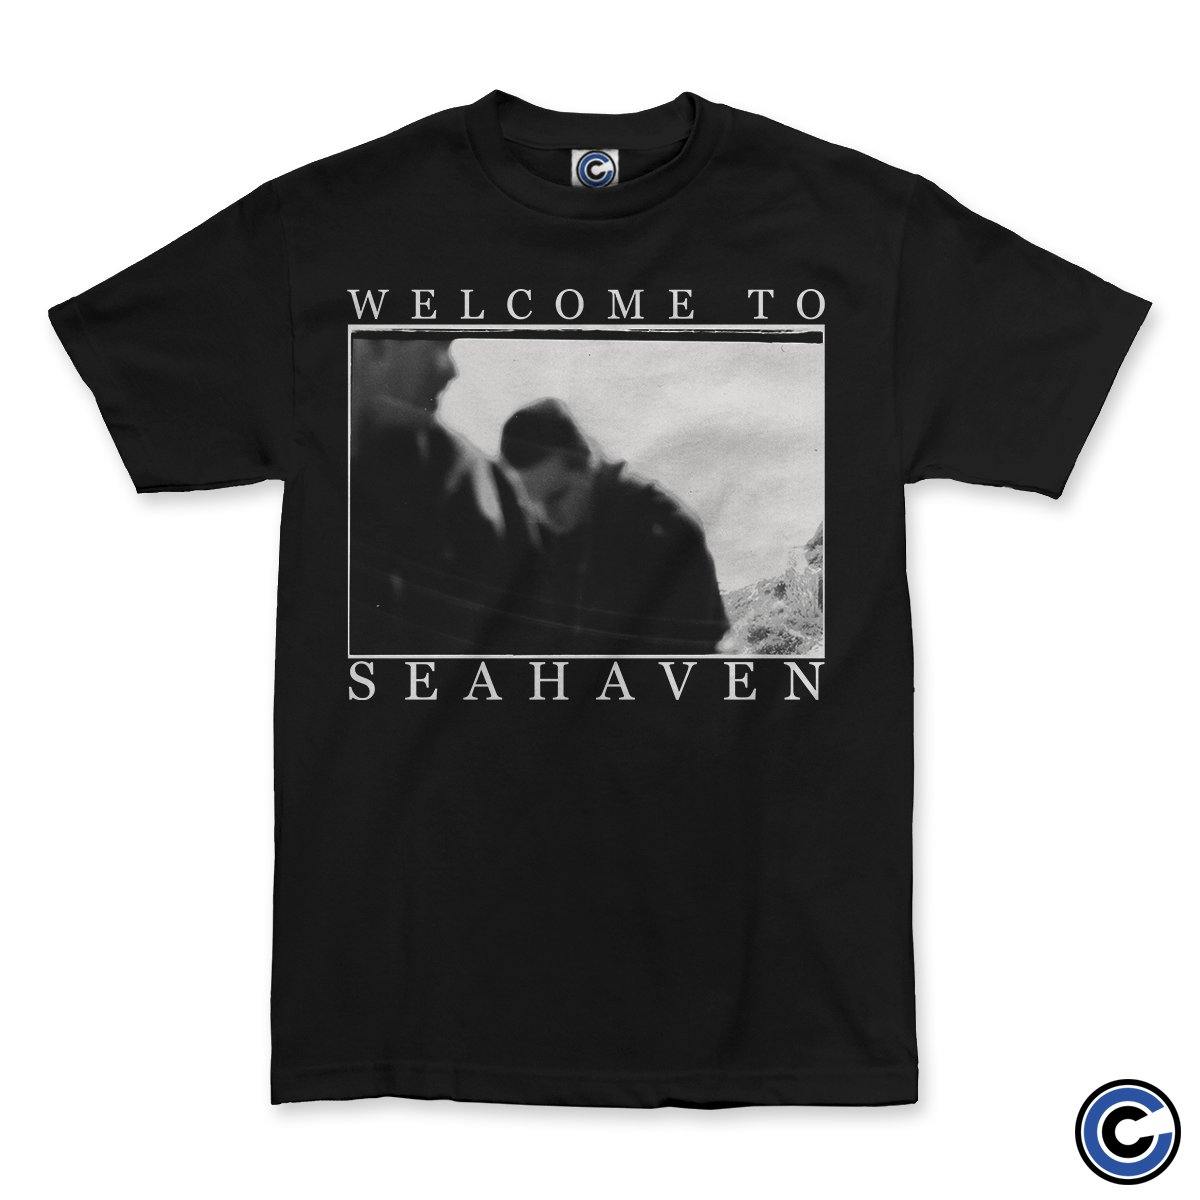 Buy – Seahaven "Welcome" Shirt – Band & Music Merch – Cold Cuts Merch